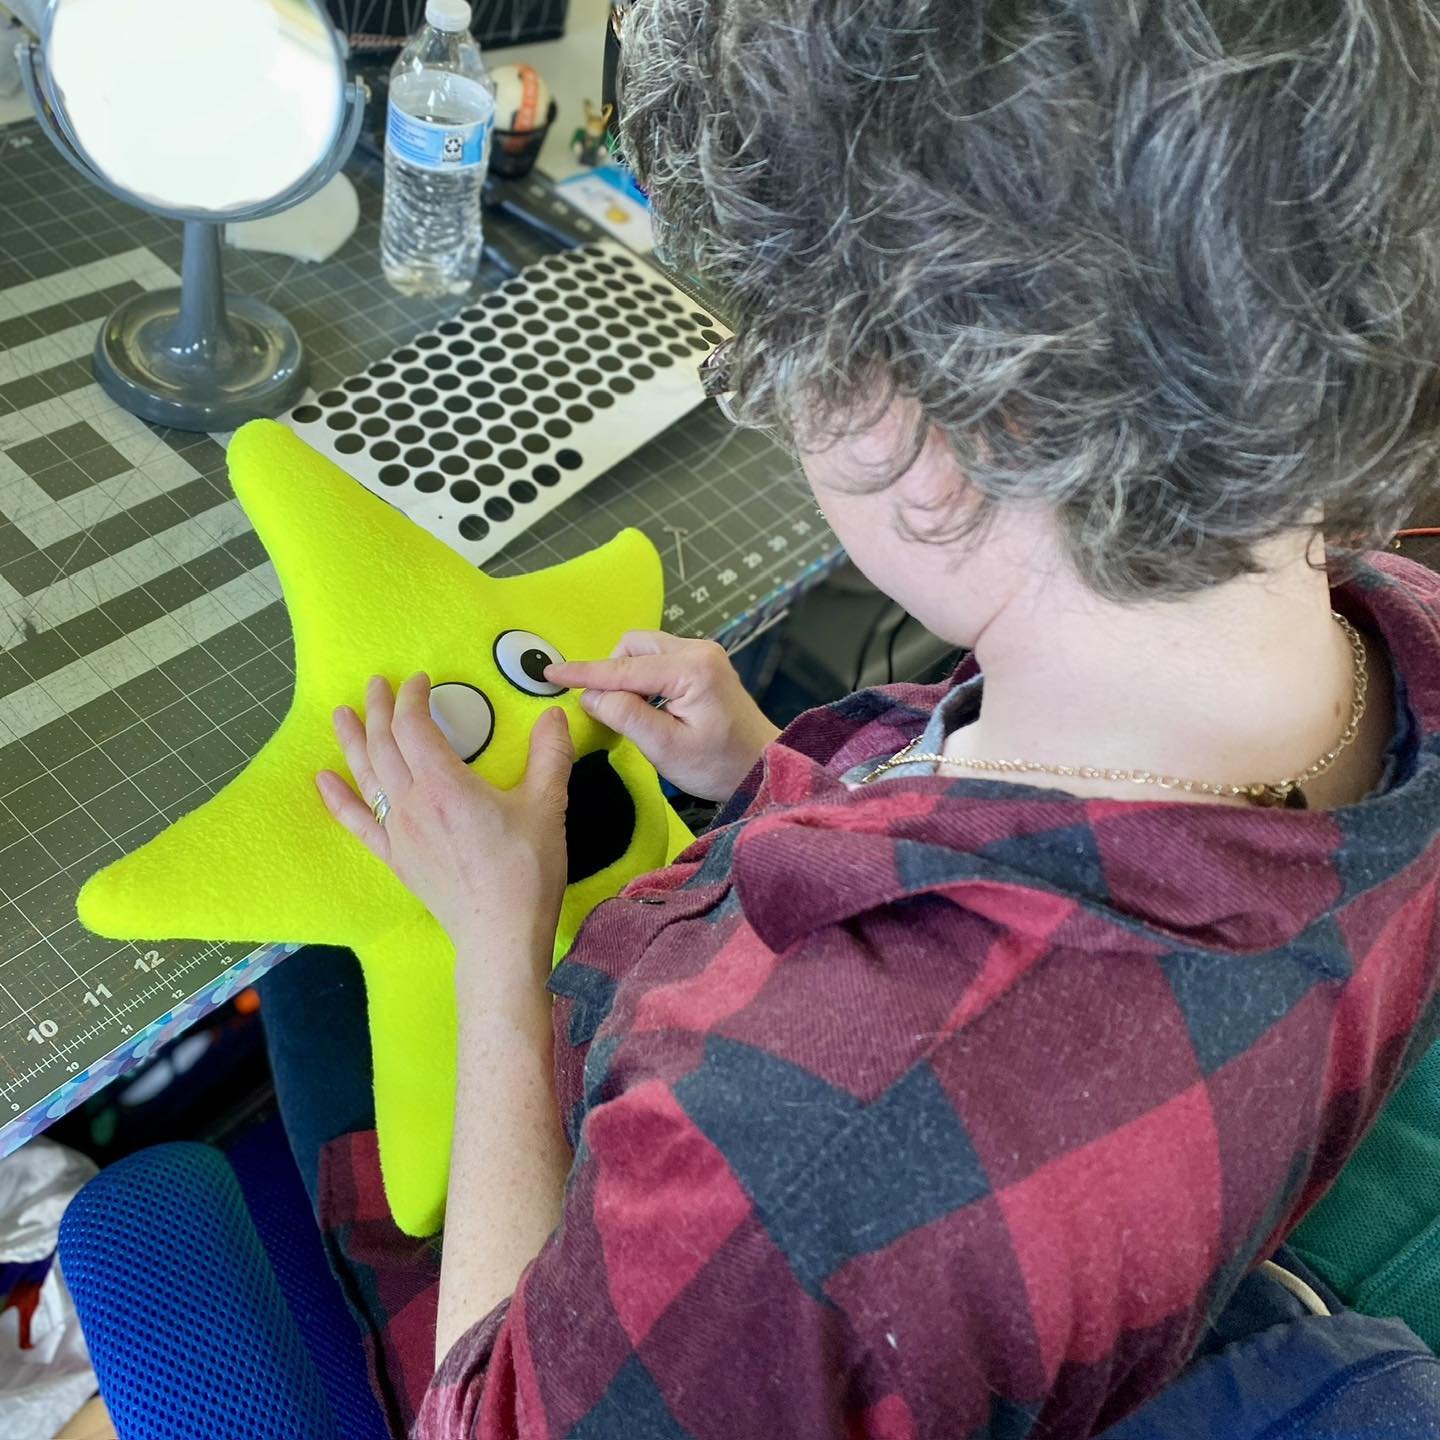 The blacklight &ldquo;star&rdquo; of the show is getting its final touches! ⭐️😎

#OneWay2 #star #puppet #puppets #blacklight #blacklightpuppet #puppetry #puppetbuilder #puppetbuilding #creativearts #ministry #kidmin